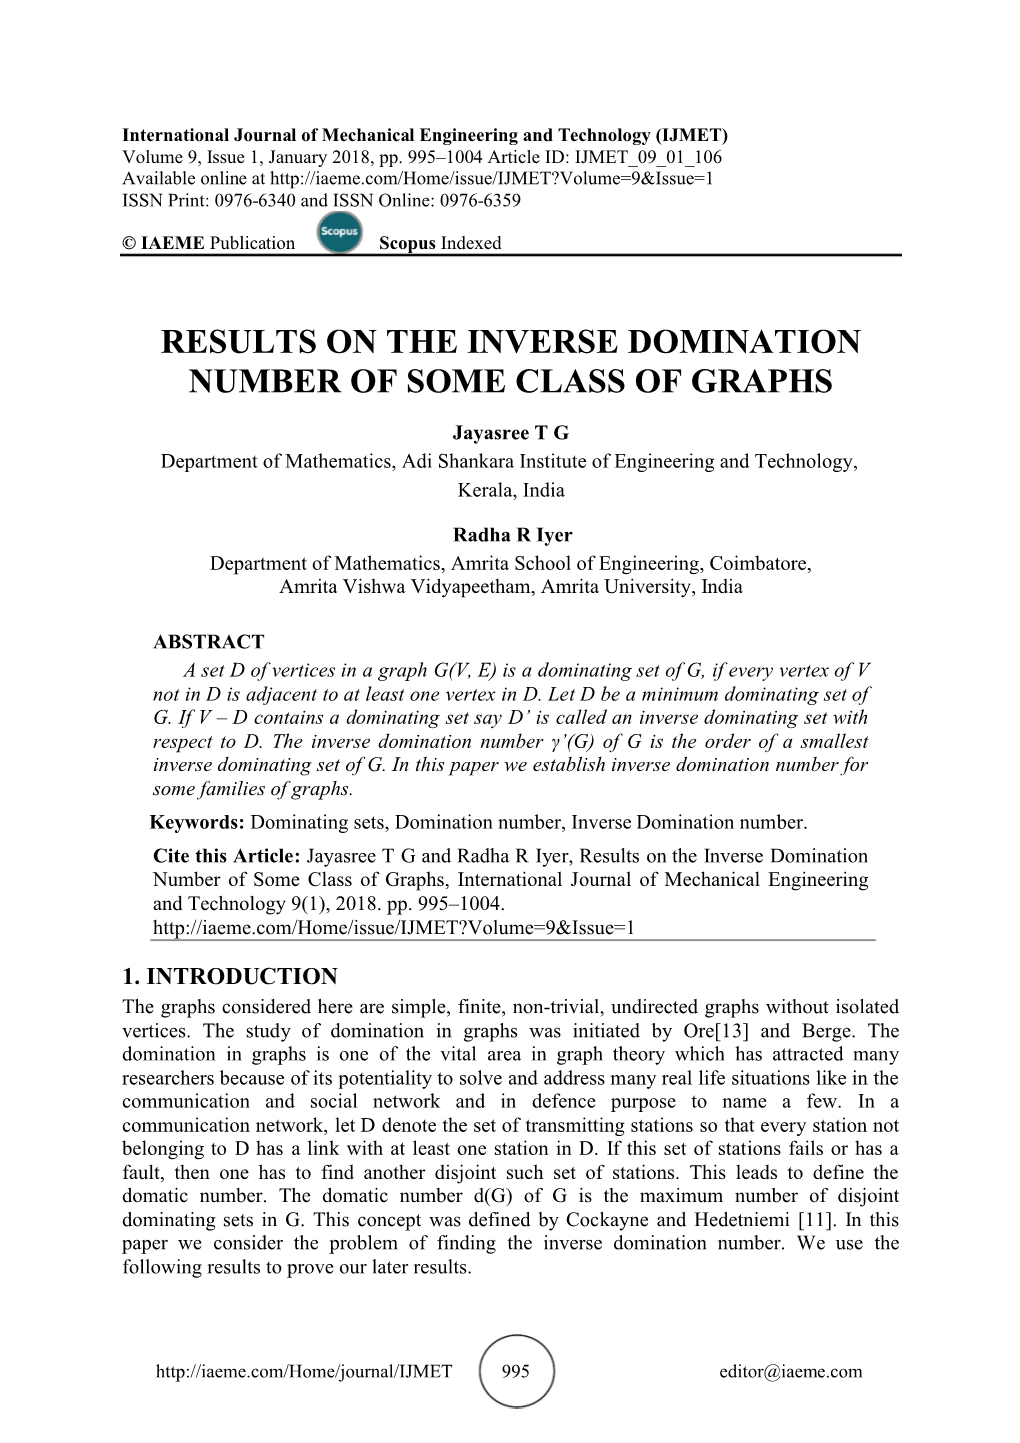 Results on the Inverse Domination Number of Some Class of Graphs